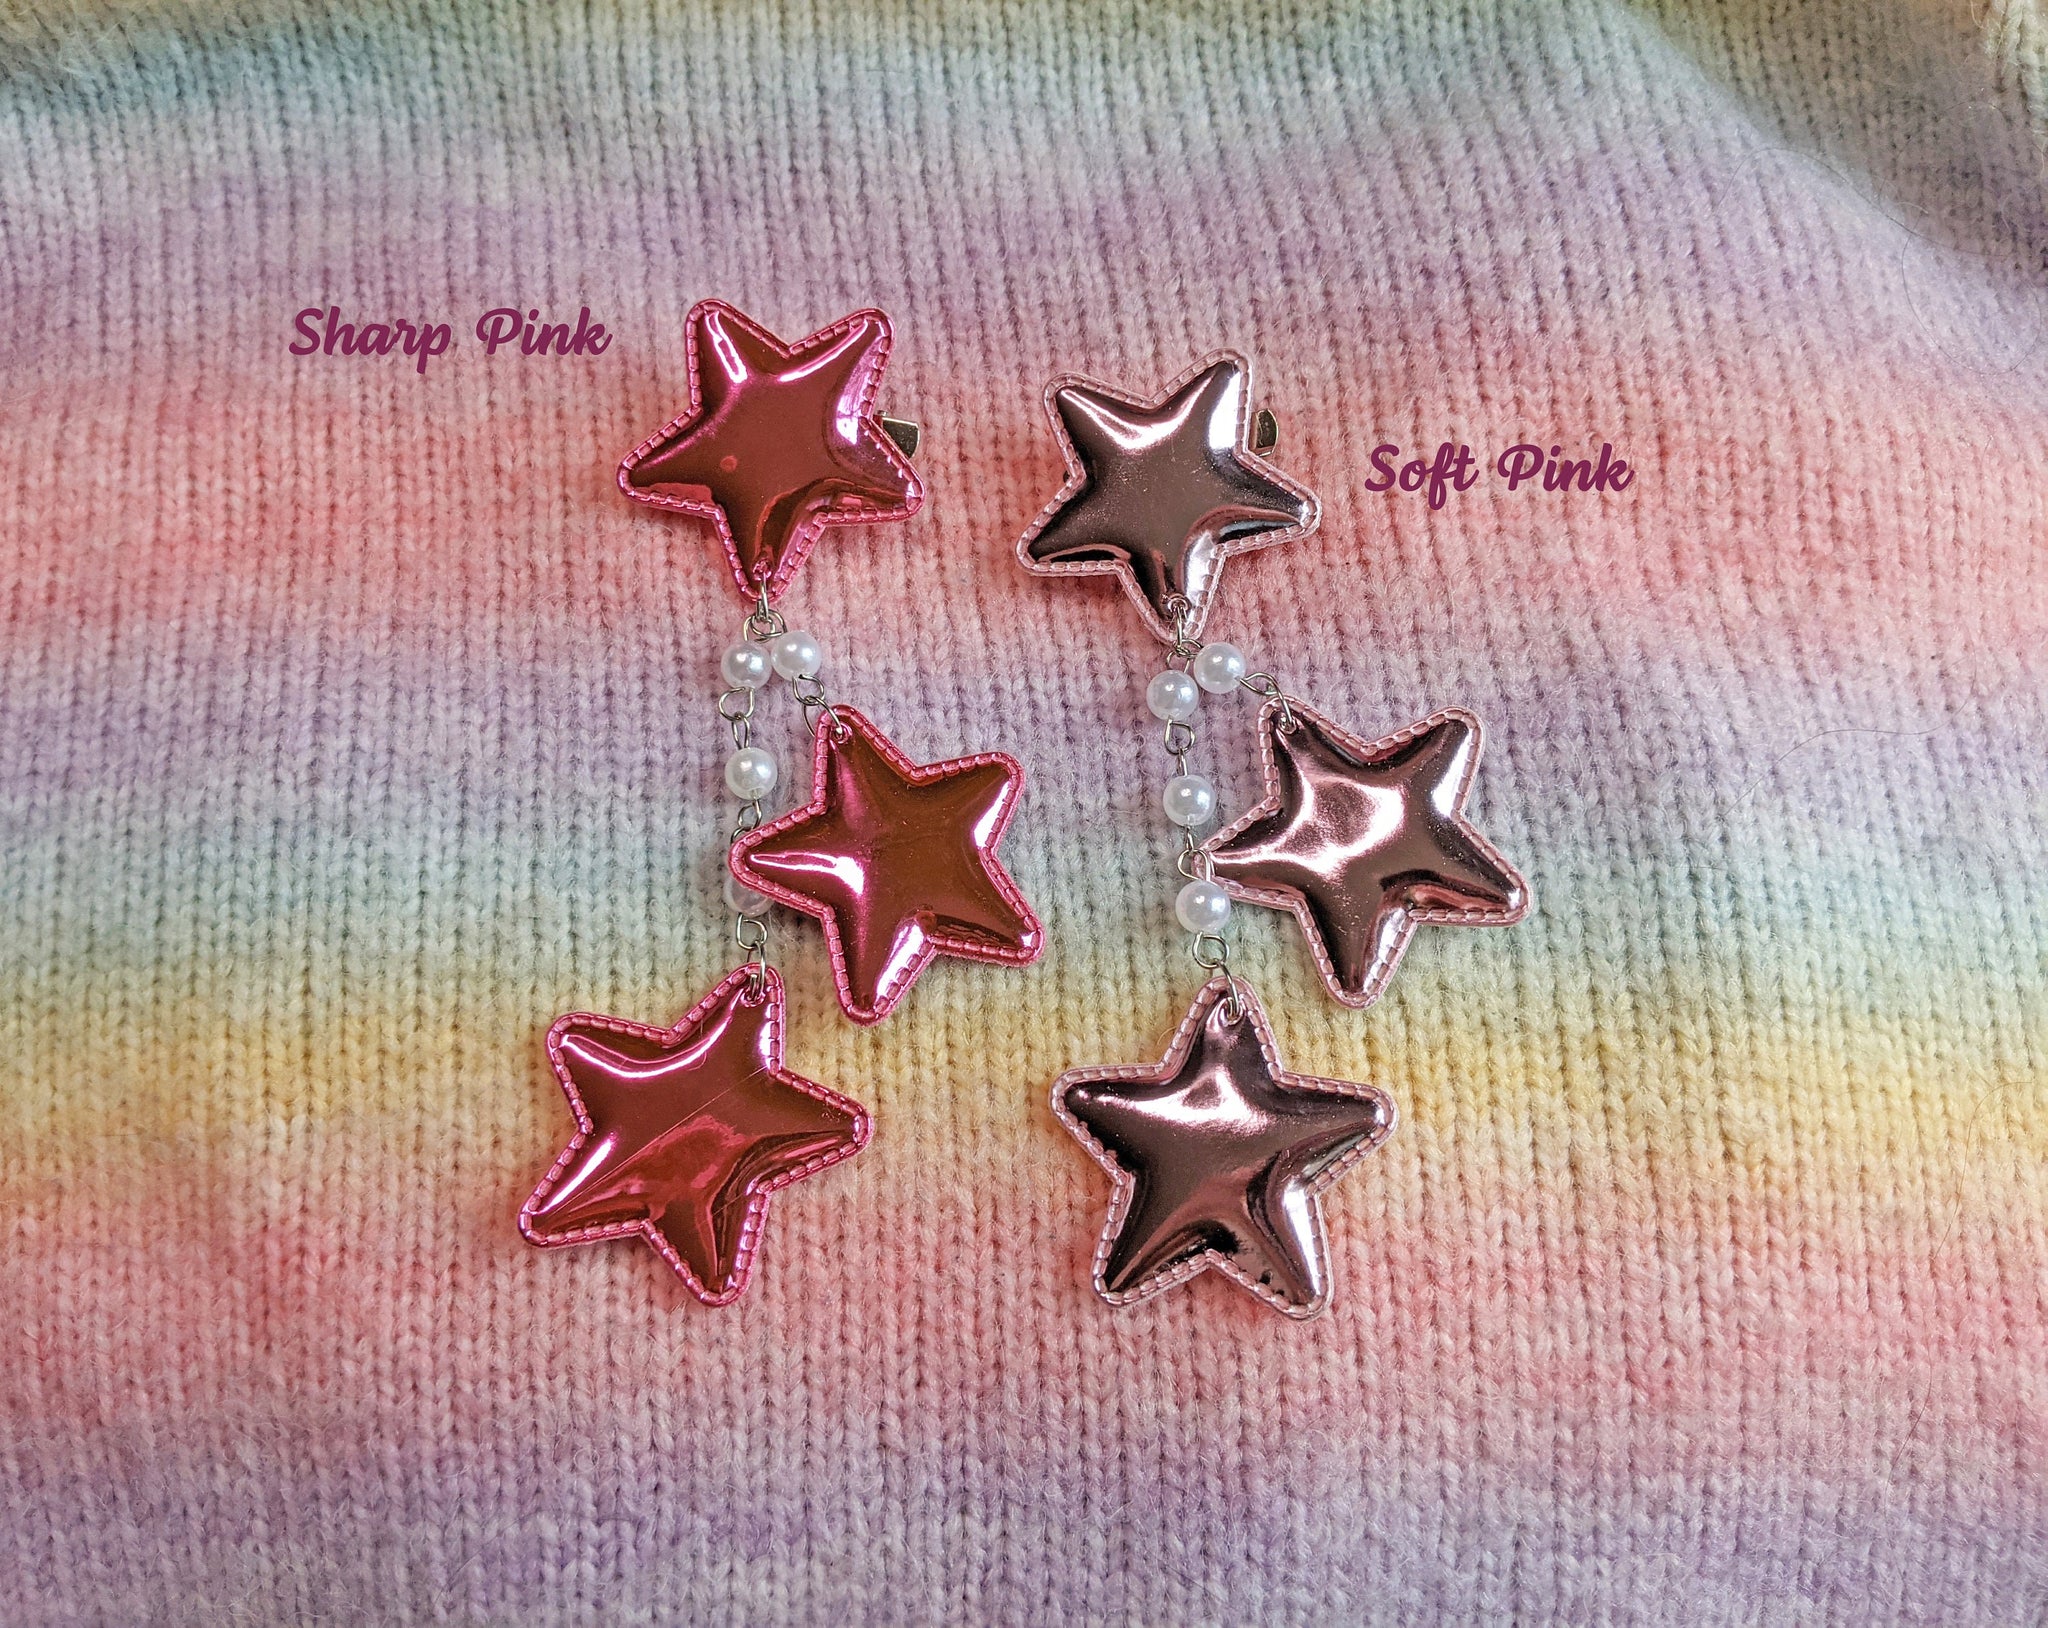 NEW 2-Way Large Super Shiny Pink Metallic Star Clips